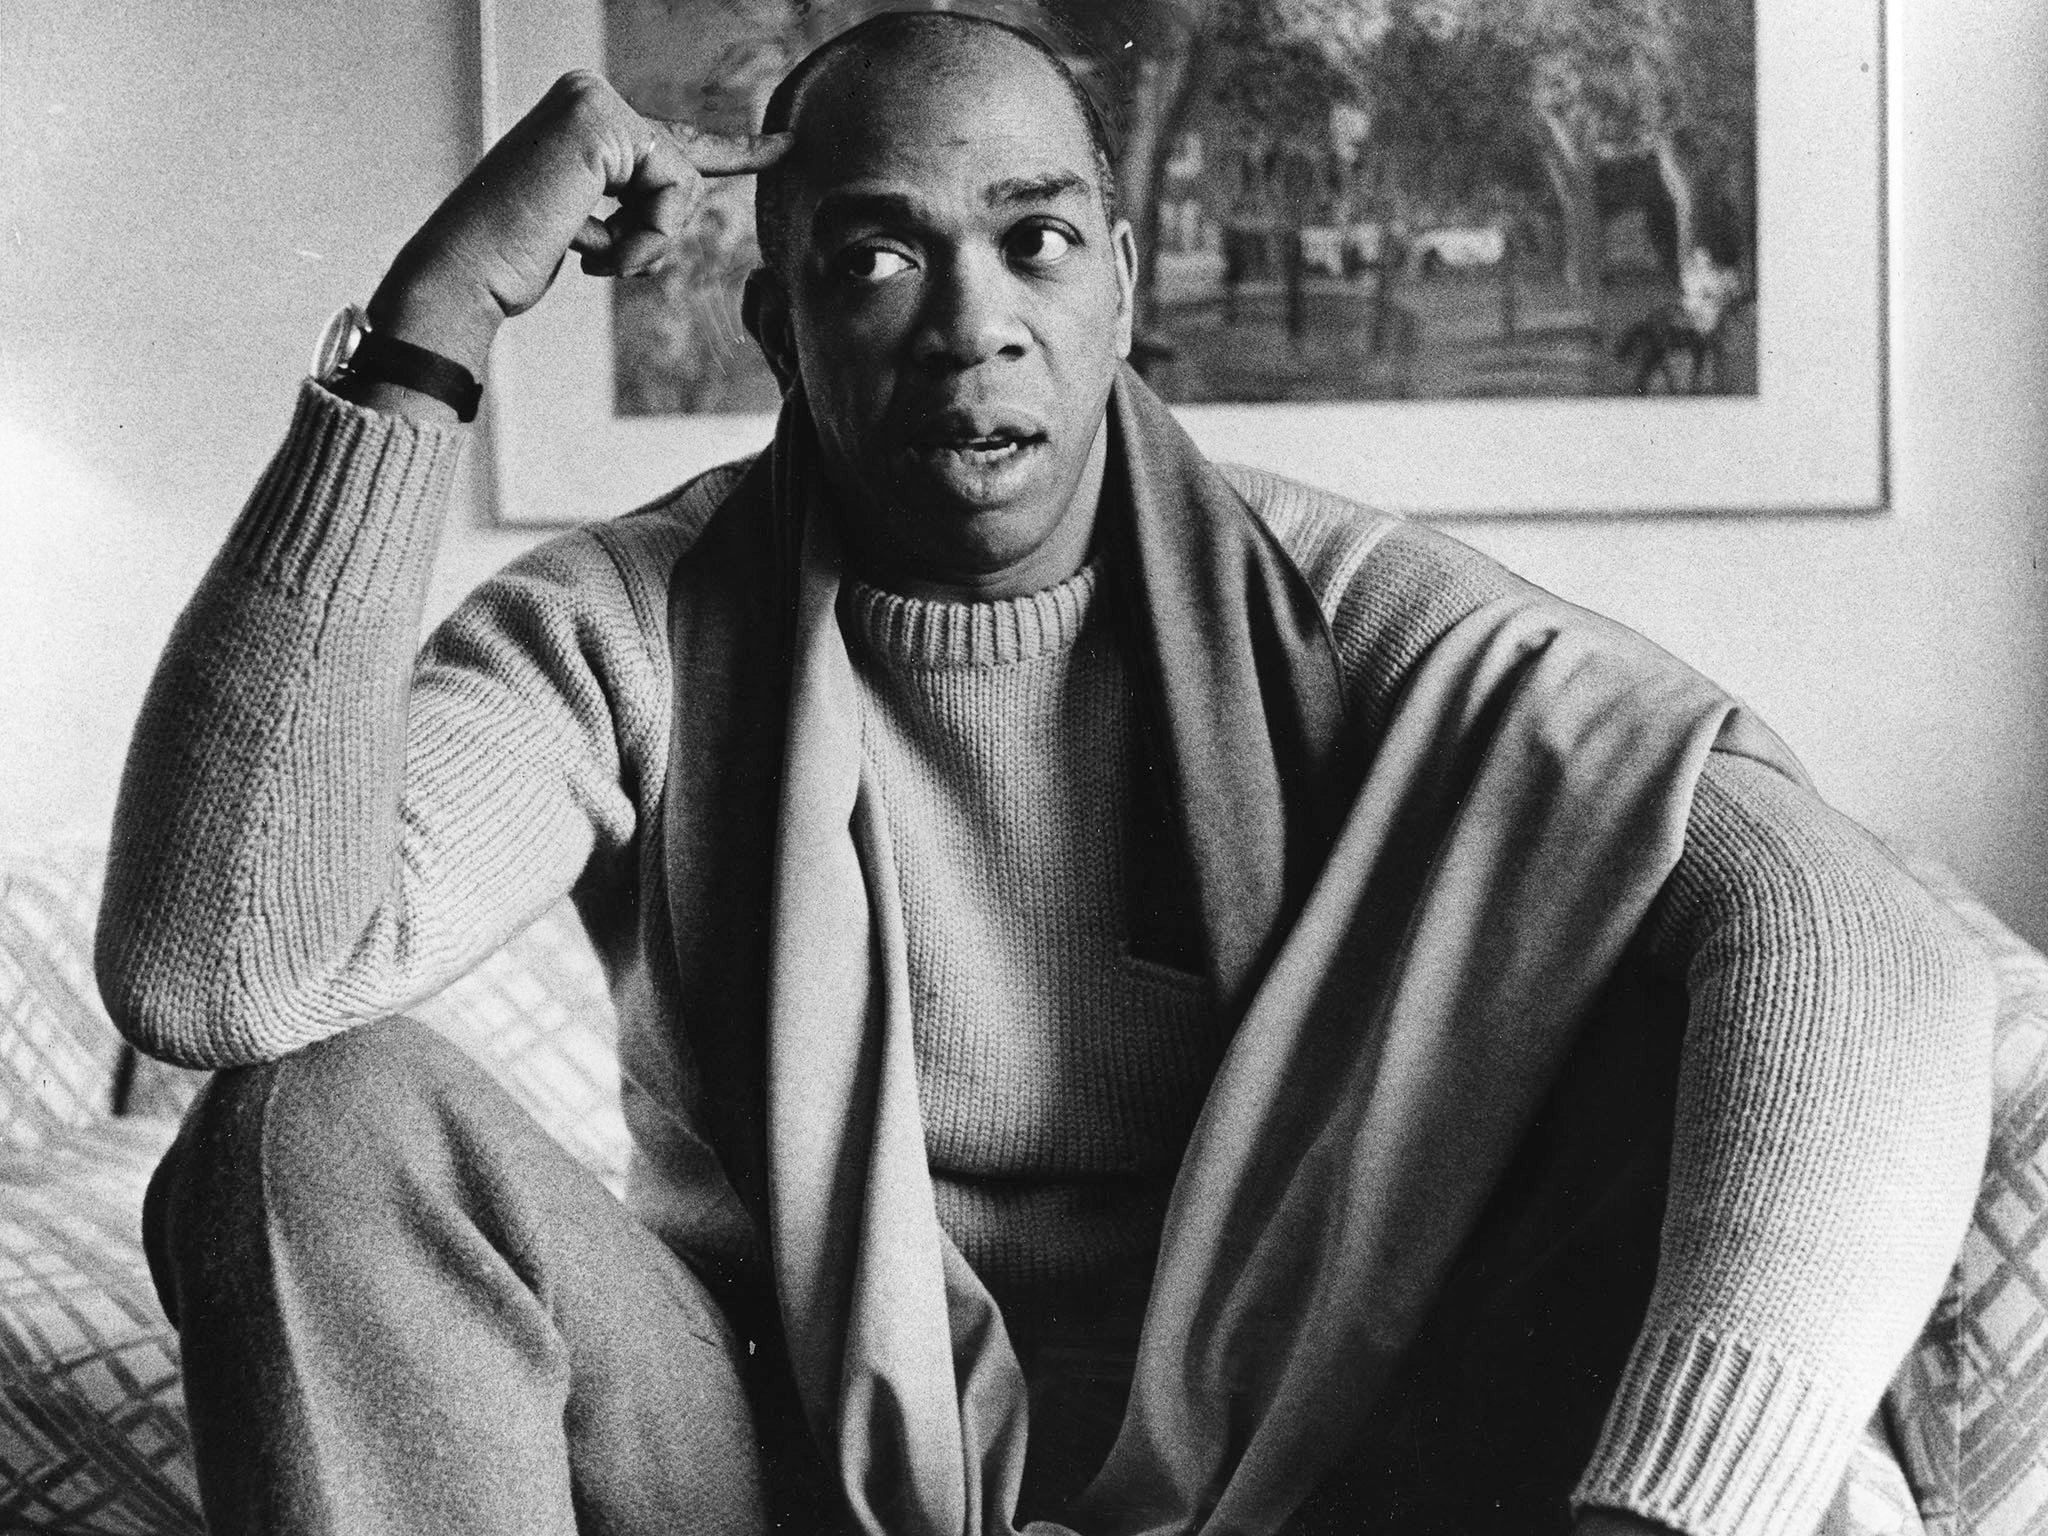 Dancer, actor and artist Geoffrey Holder is seen in Washington, D.C. in this January 1978, photo